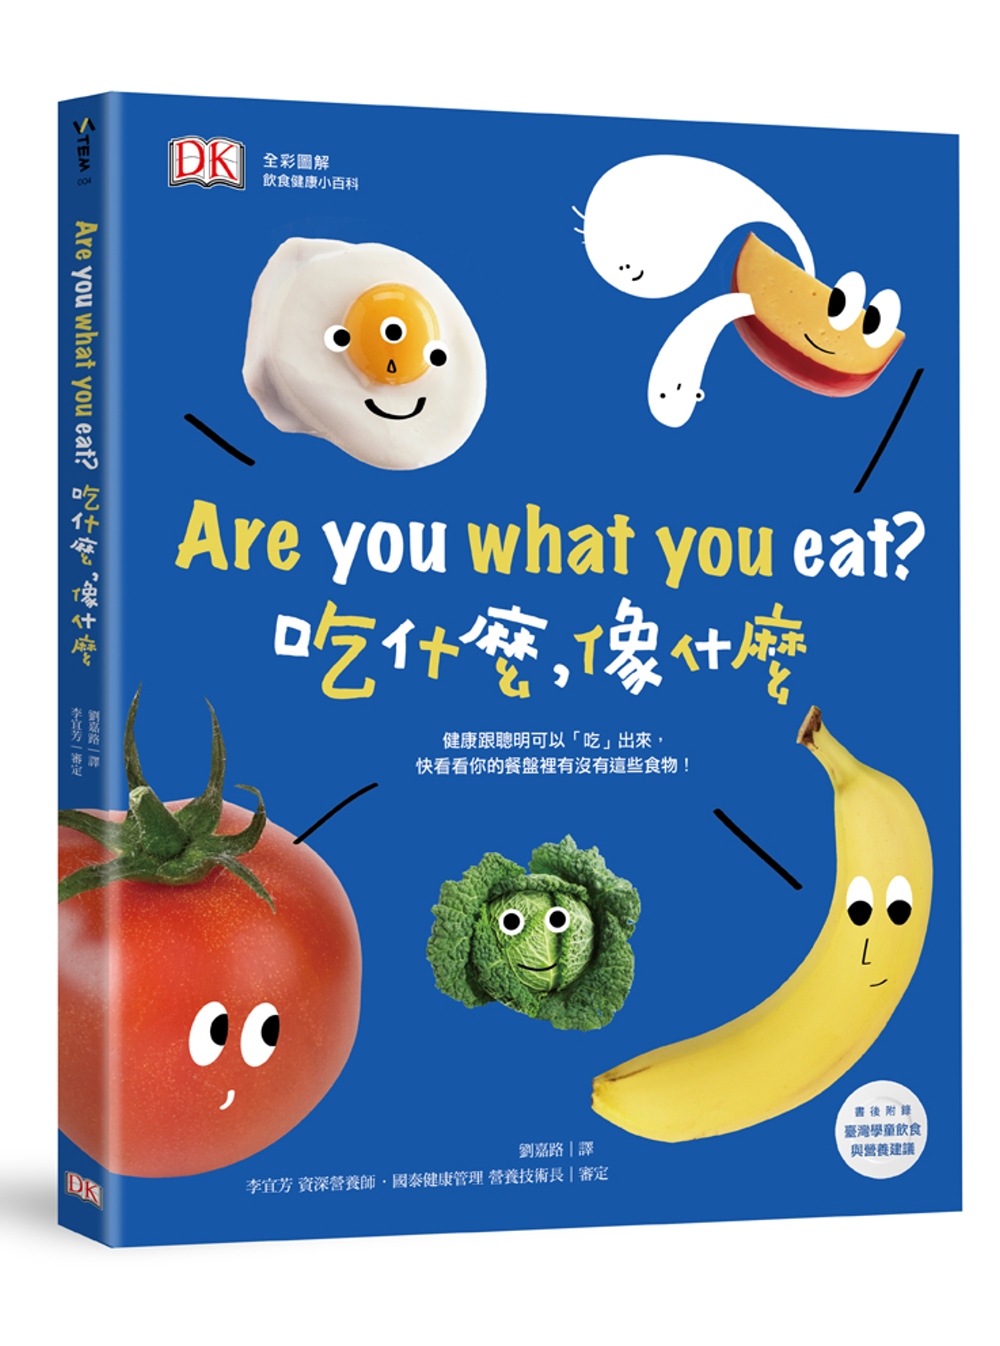 DK全彩圖解 健康飲食小百科 Are you what you eat? 吃什麼，像什麼